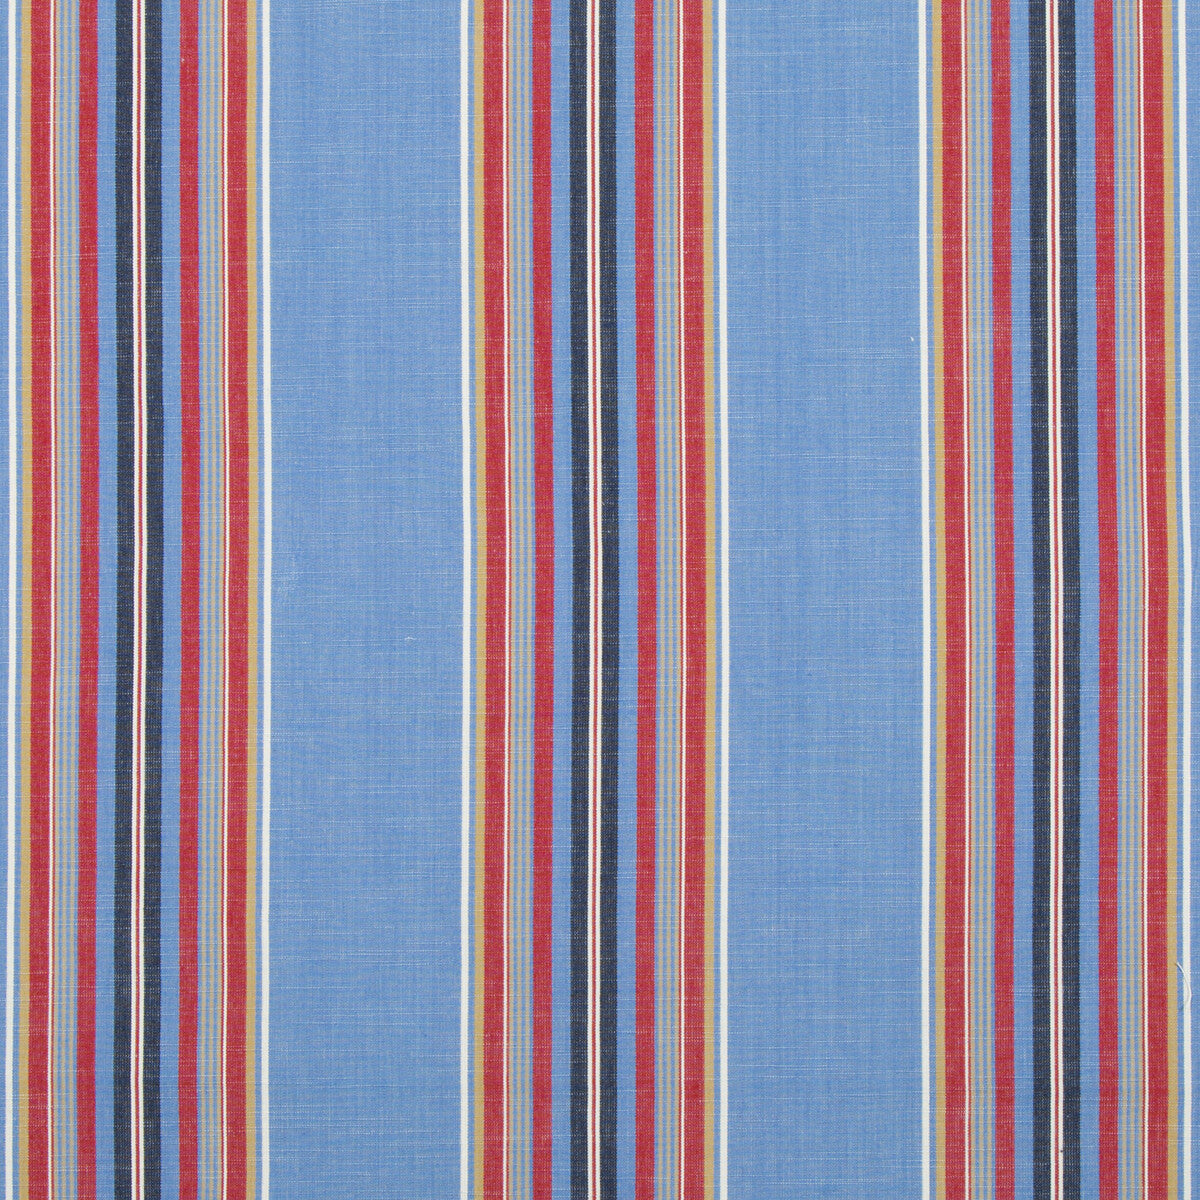 Verdon Stripe fabric in blue/red color - pattern 8017101.519.0 - by Brunschwig &amp; Fils in the Durance collection